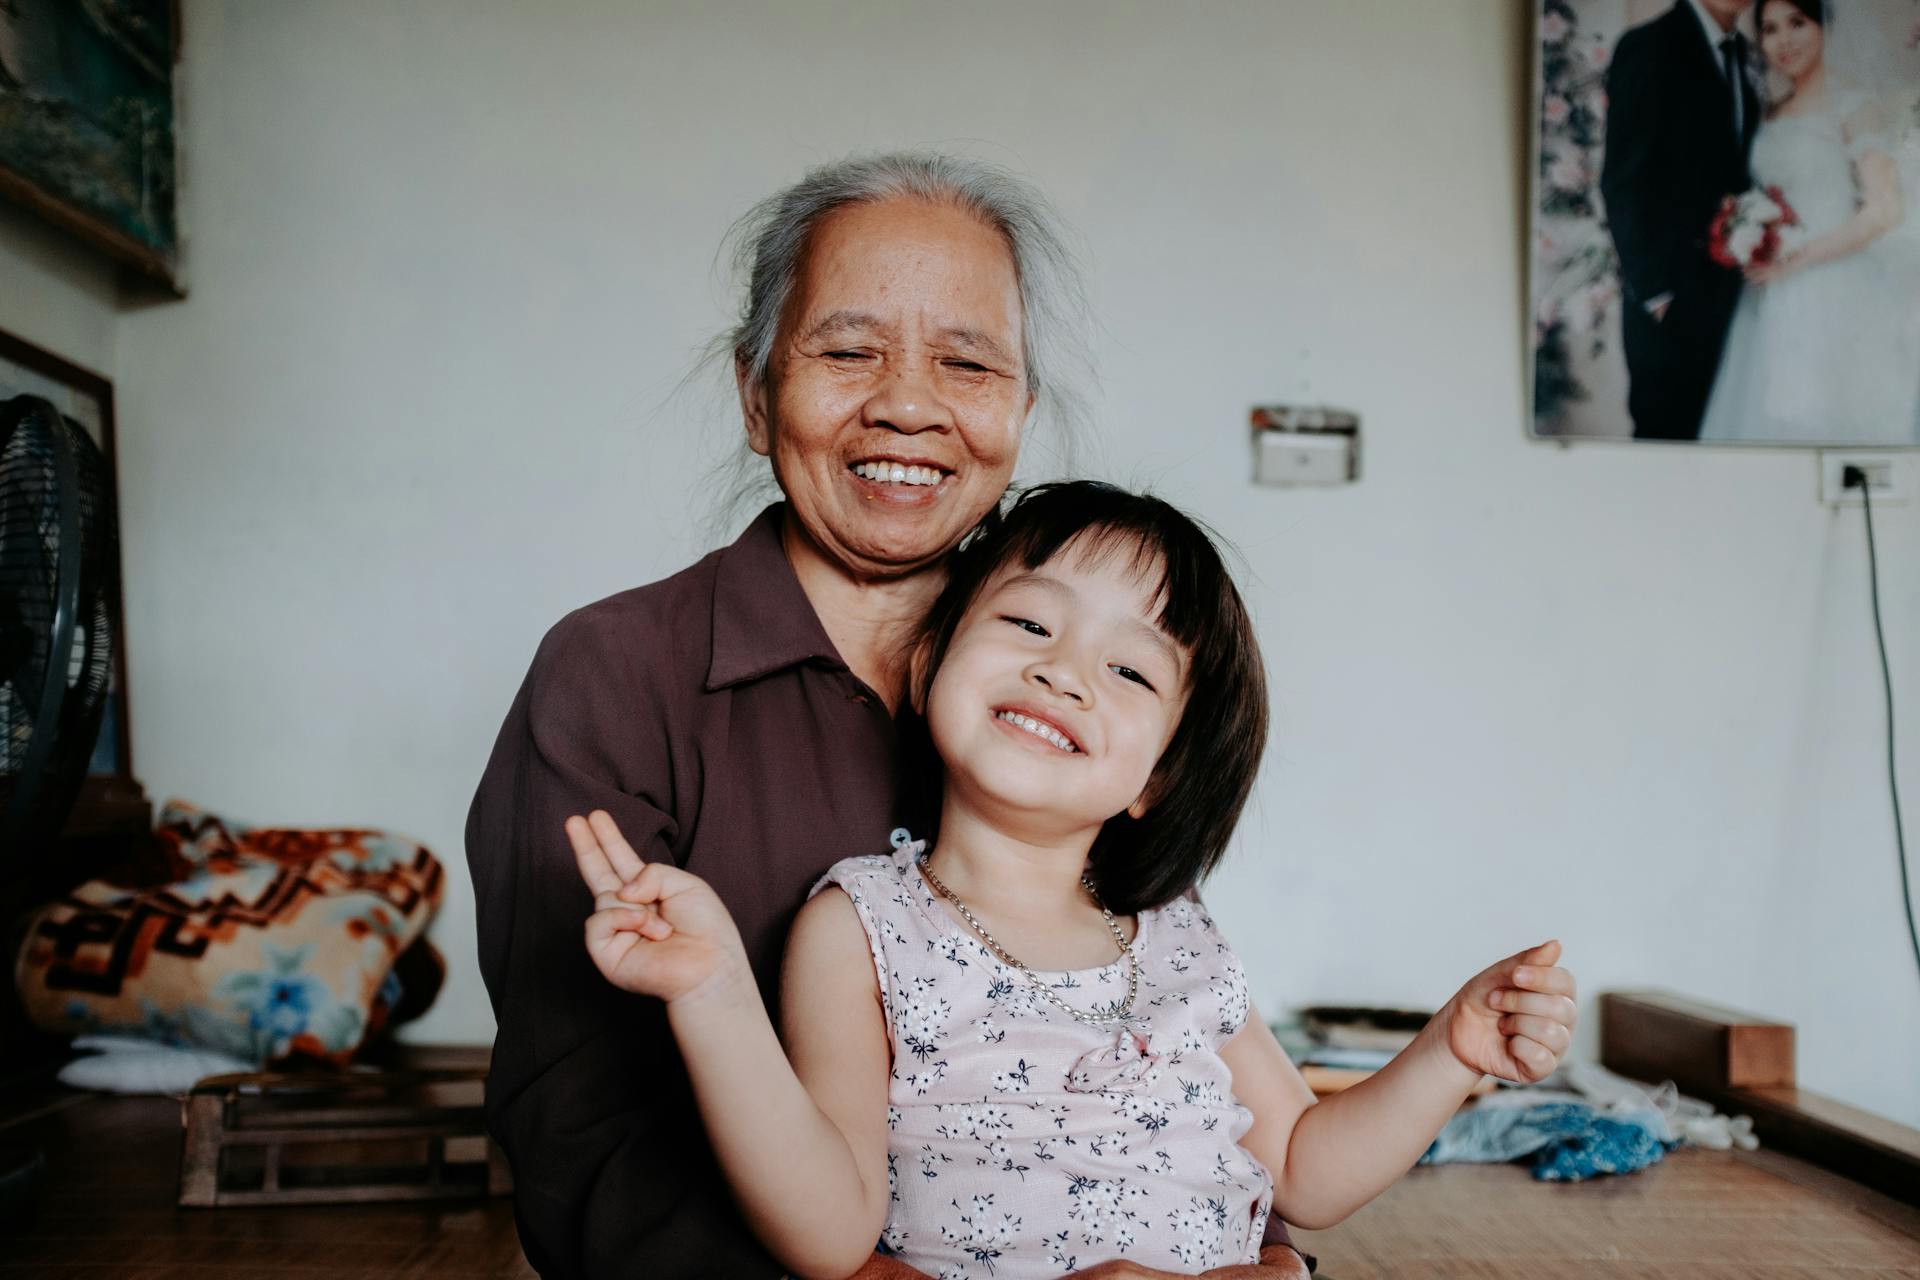 A little girl with her grandmother | Source: Pexels